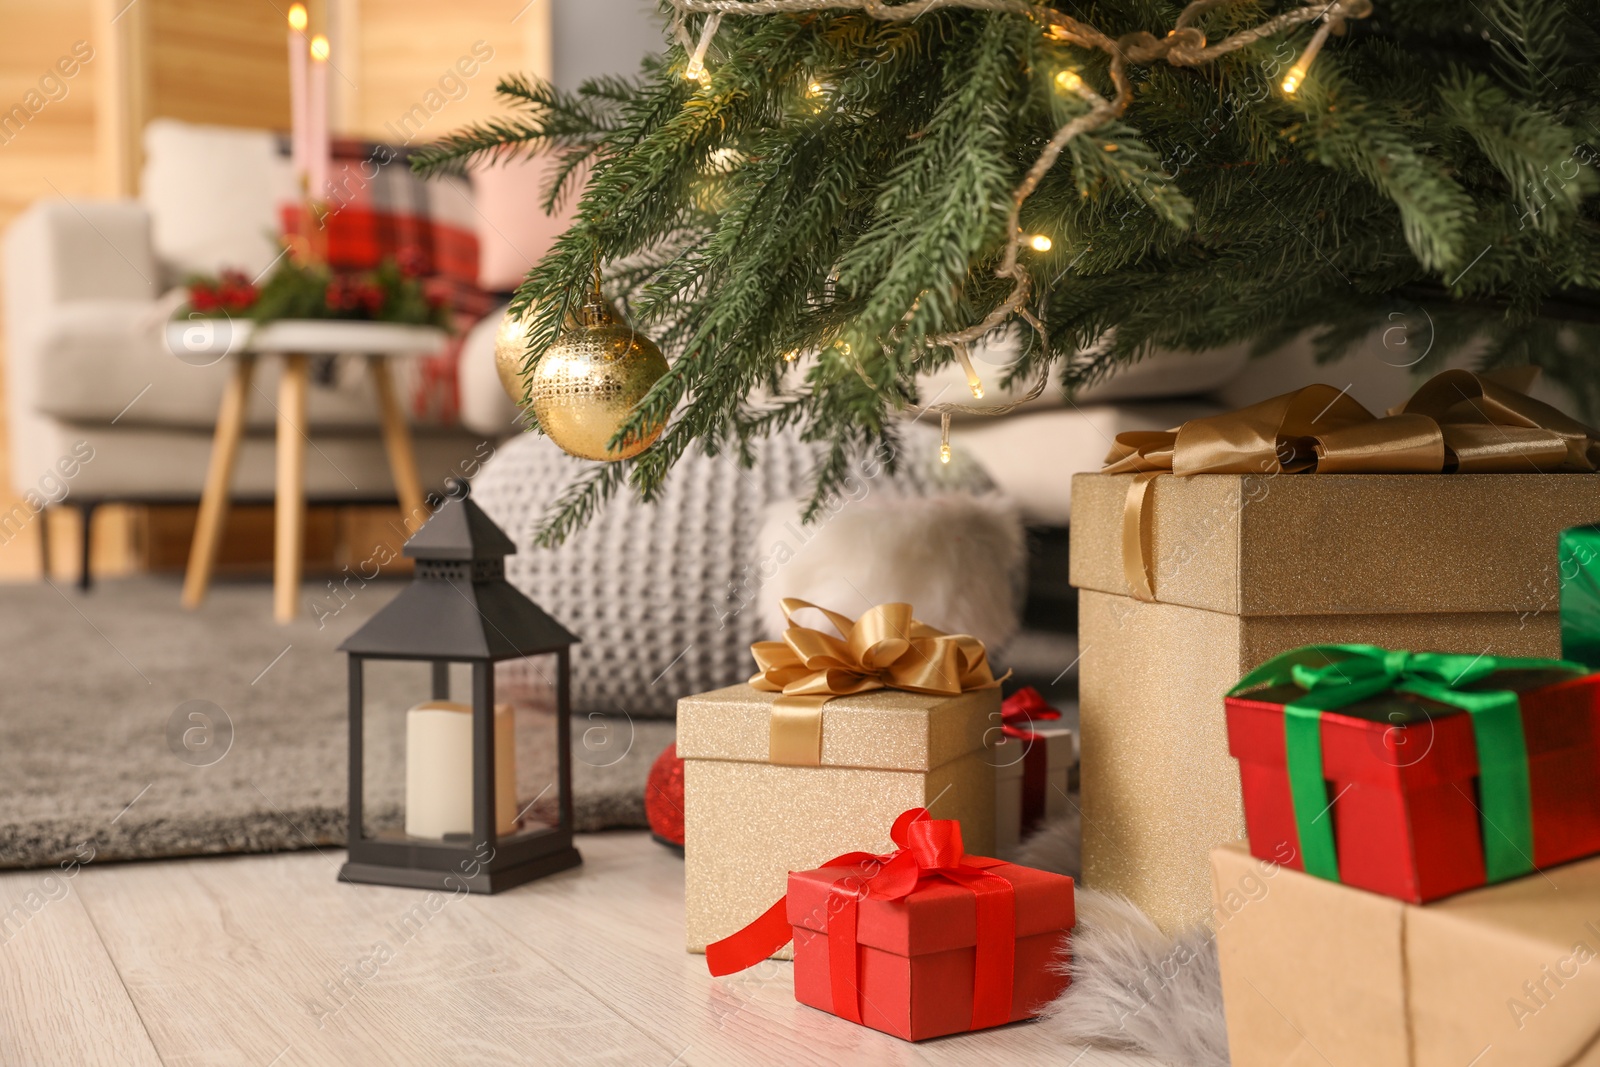 Photo of Gift boxes under Christmas tree and lantern with candle indoors